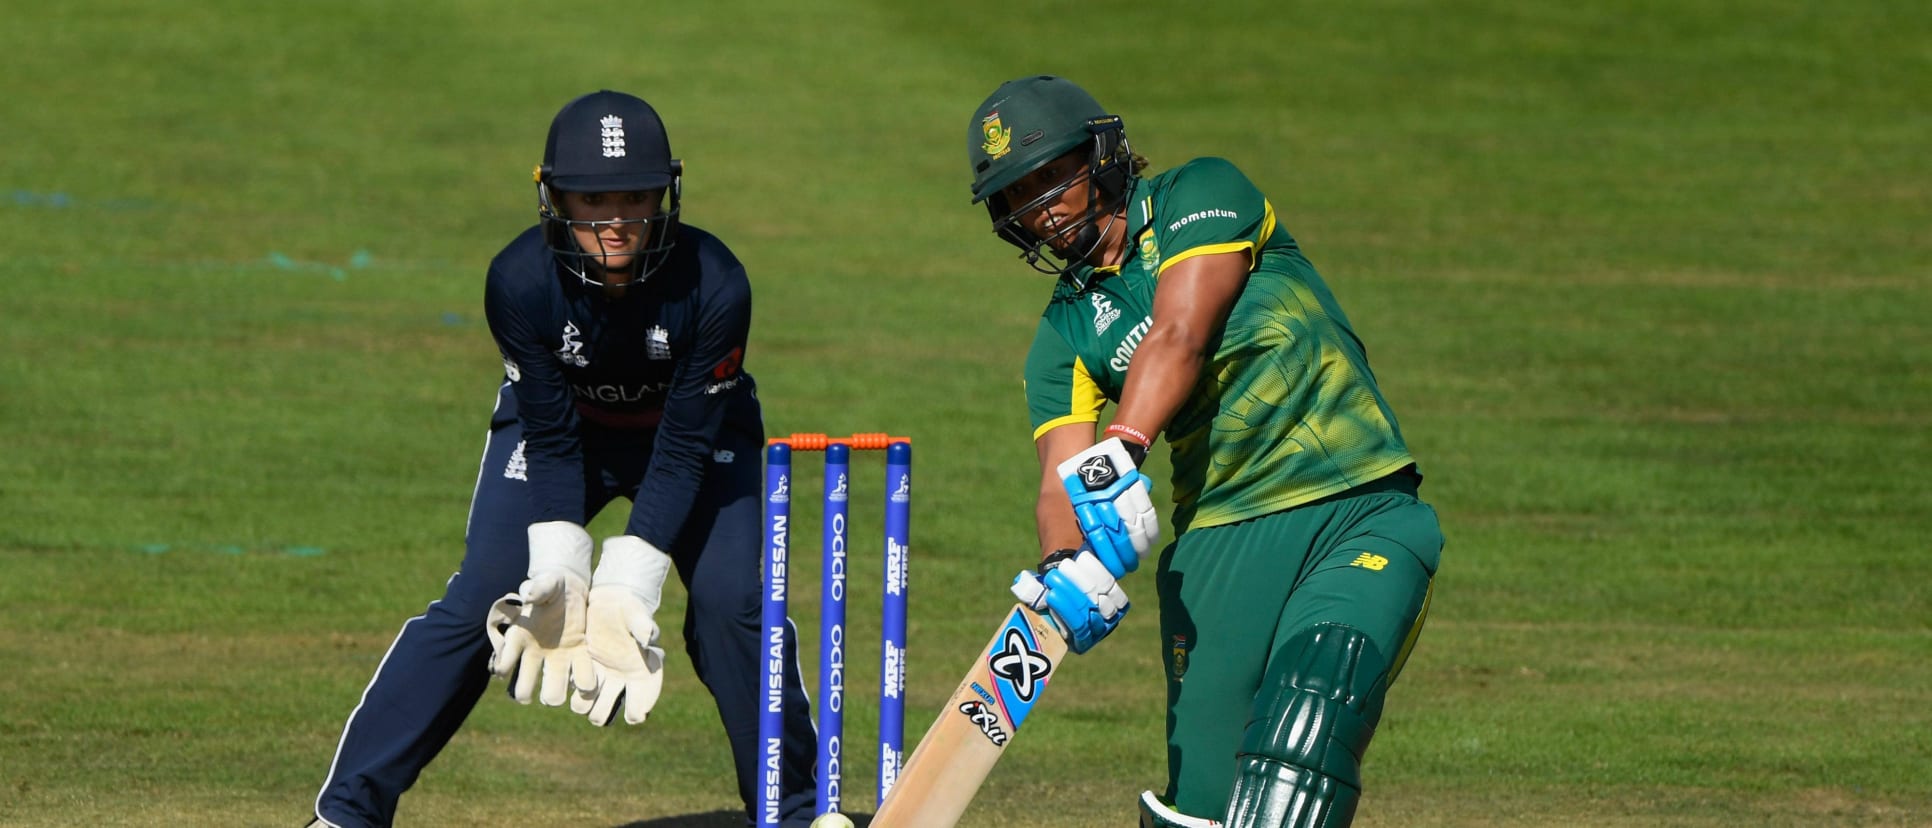 Although batters like Chloe Tryon and Laura Wolvaardt have been firing for South Africa, van Niekerk is confident her bowlers will do the same